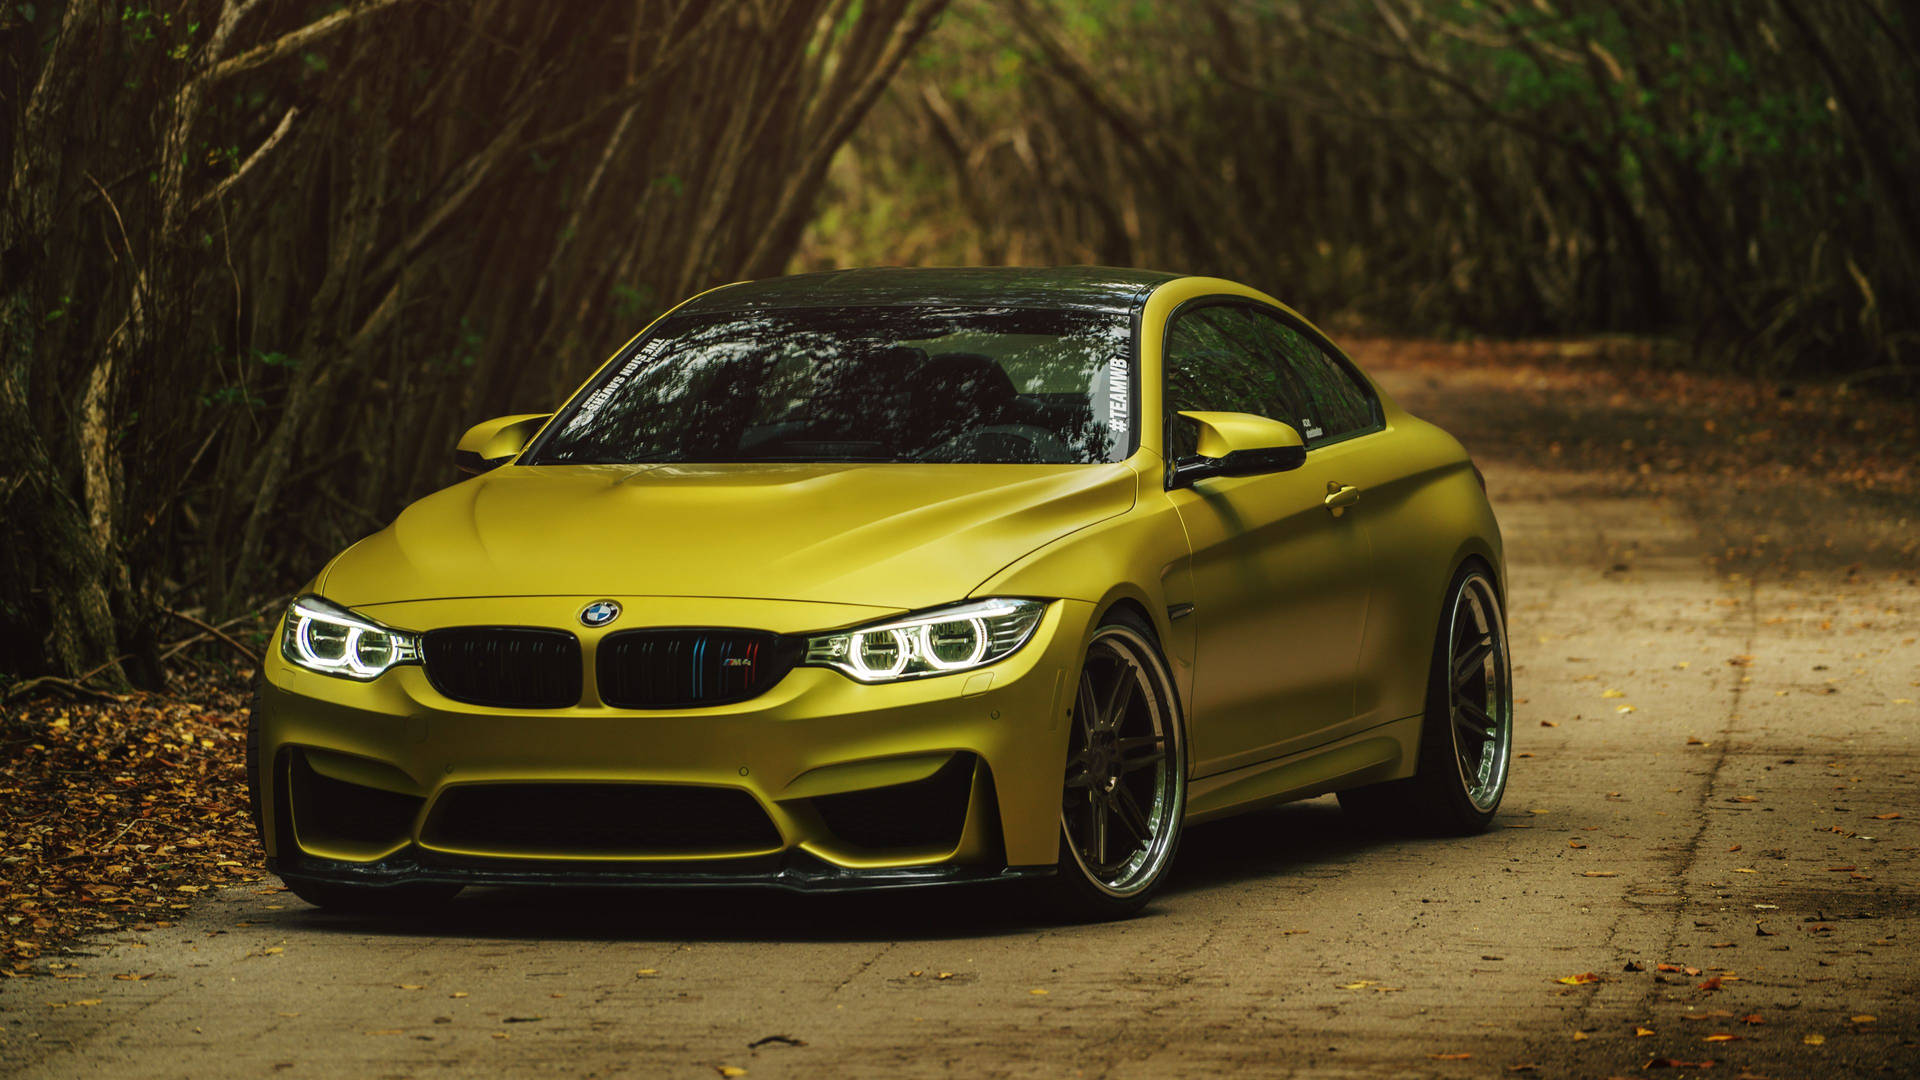 Striking Yellow Bmw M Series In Action Background